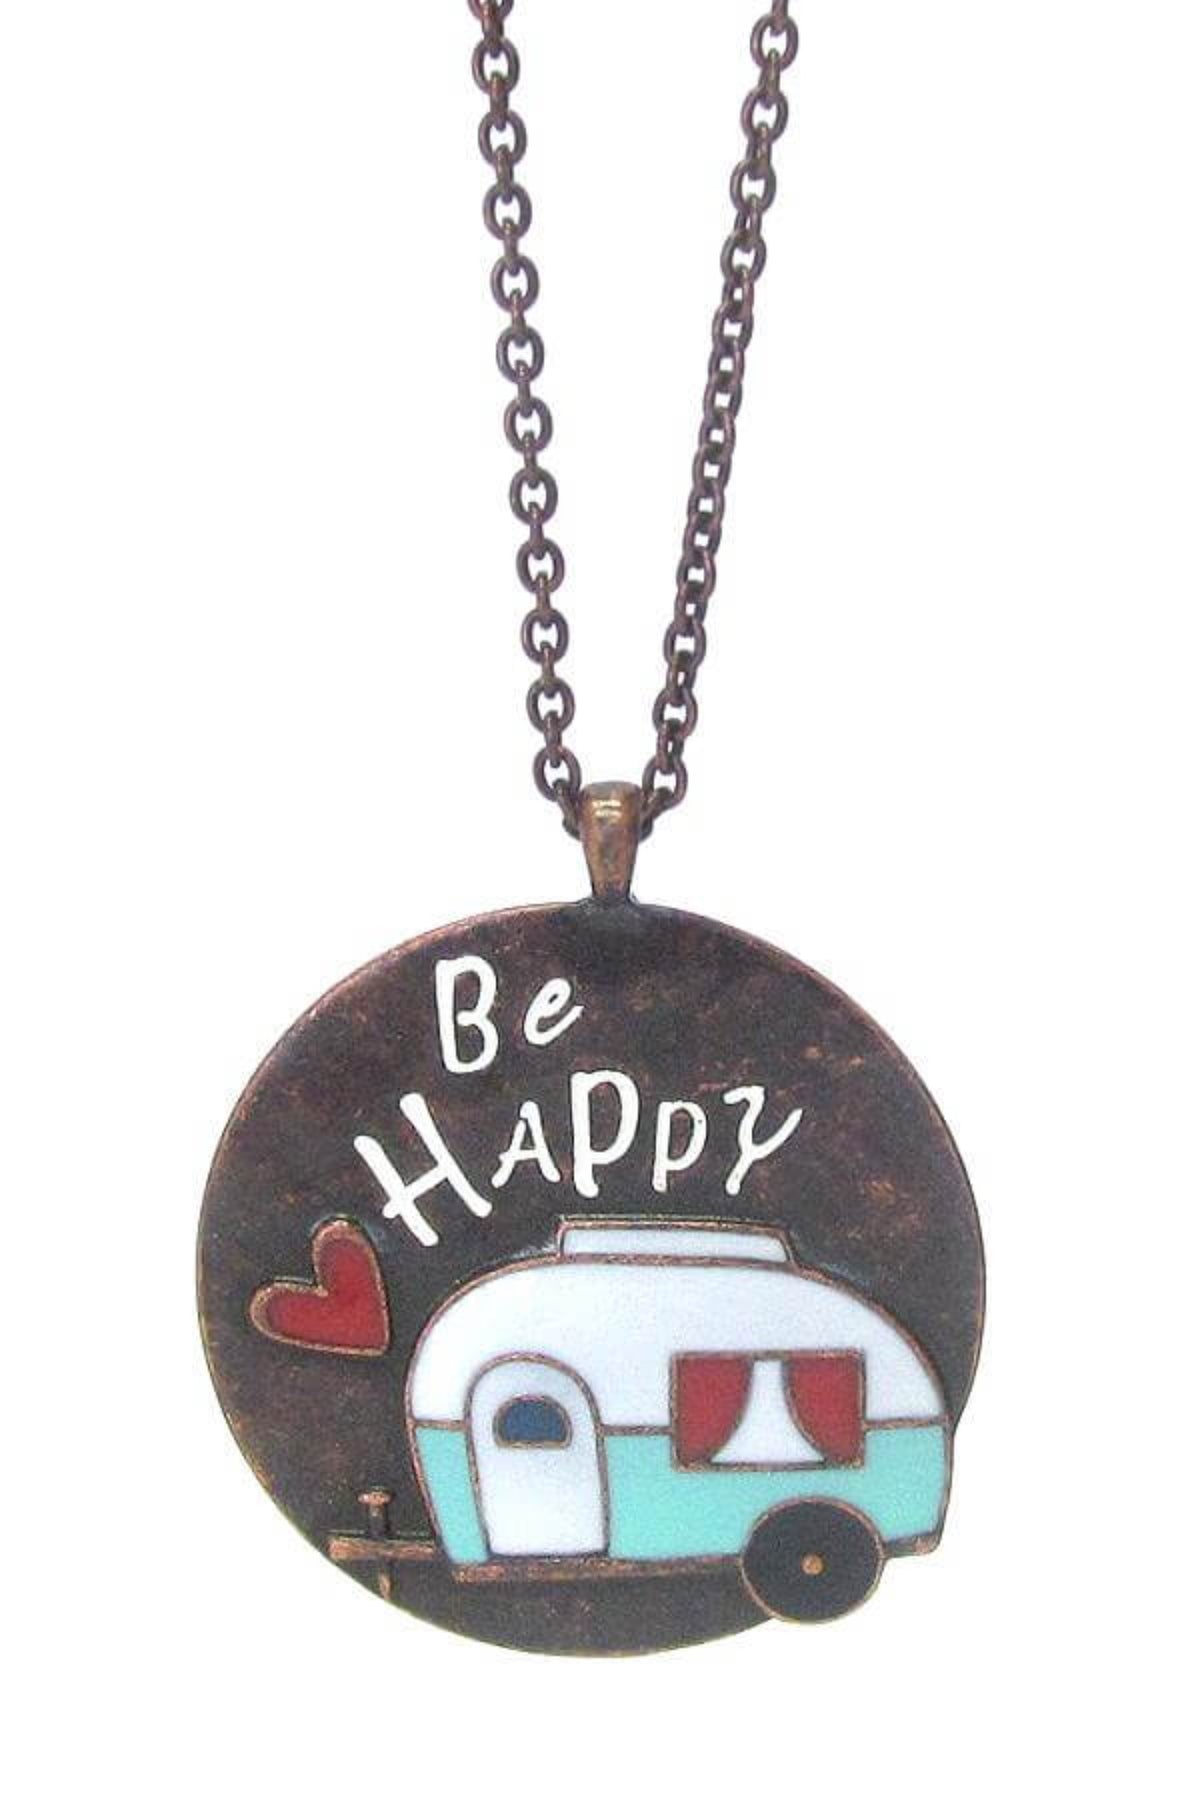 Happy Camper "Be Happy" Theme Pendant Long Necklace - The House of Awareness